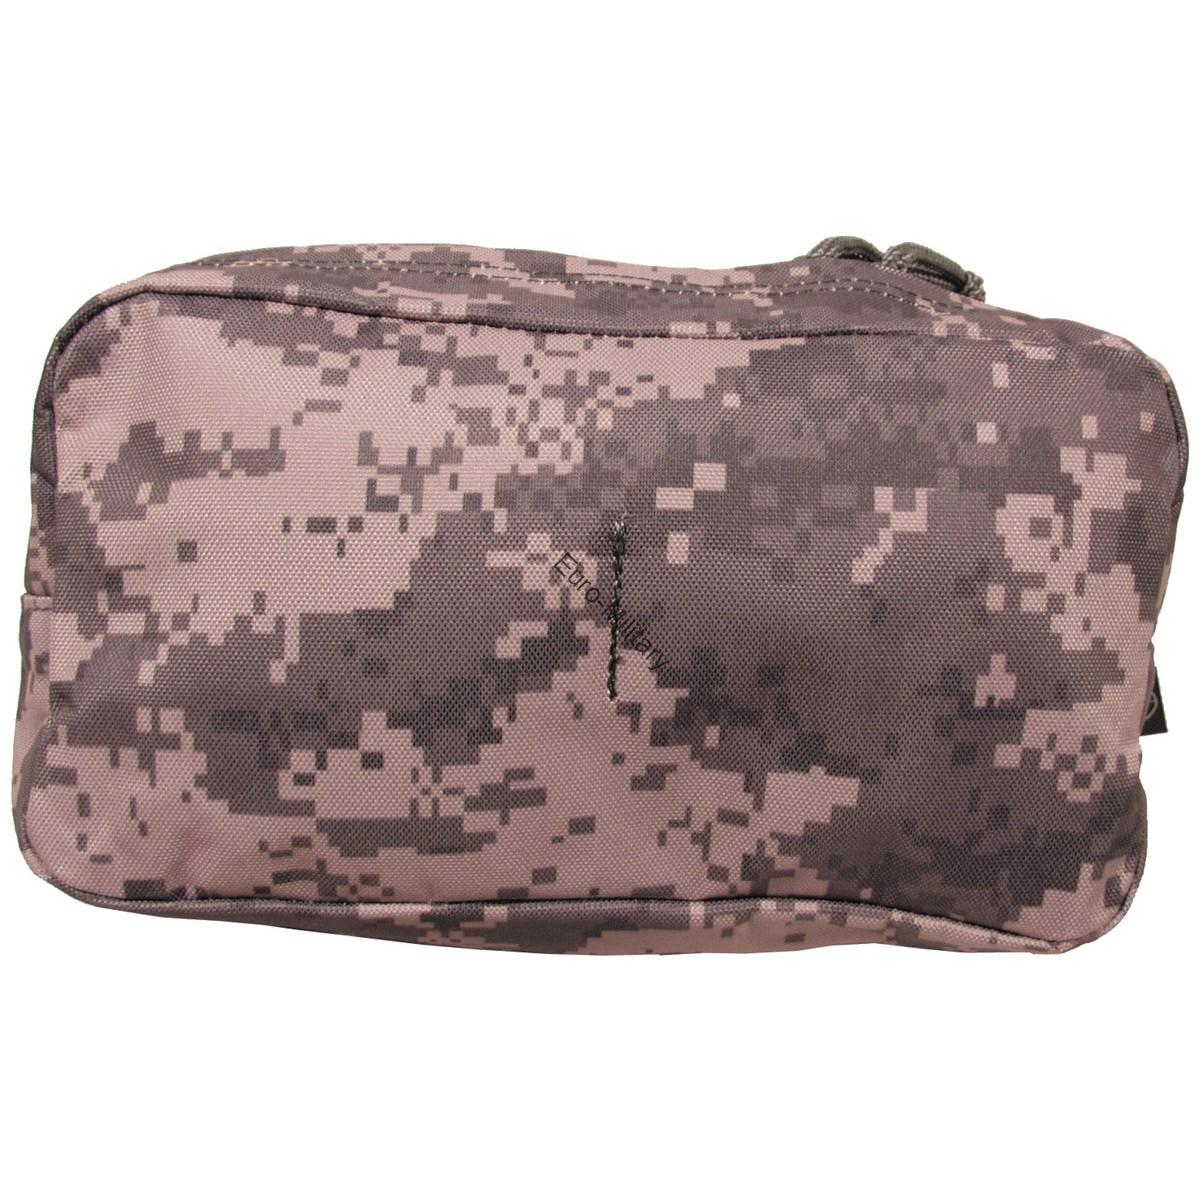 Tactical Utility Mollle Large Pouch - US Digital